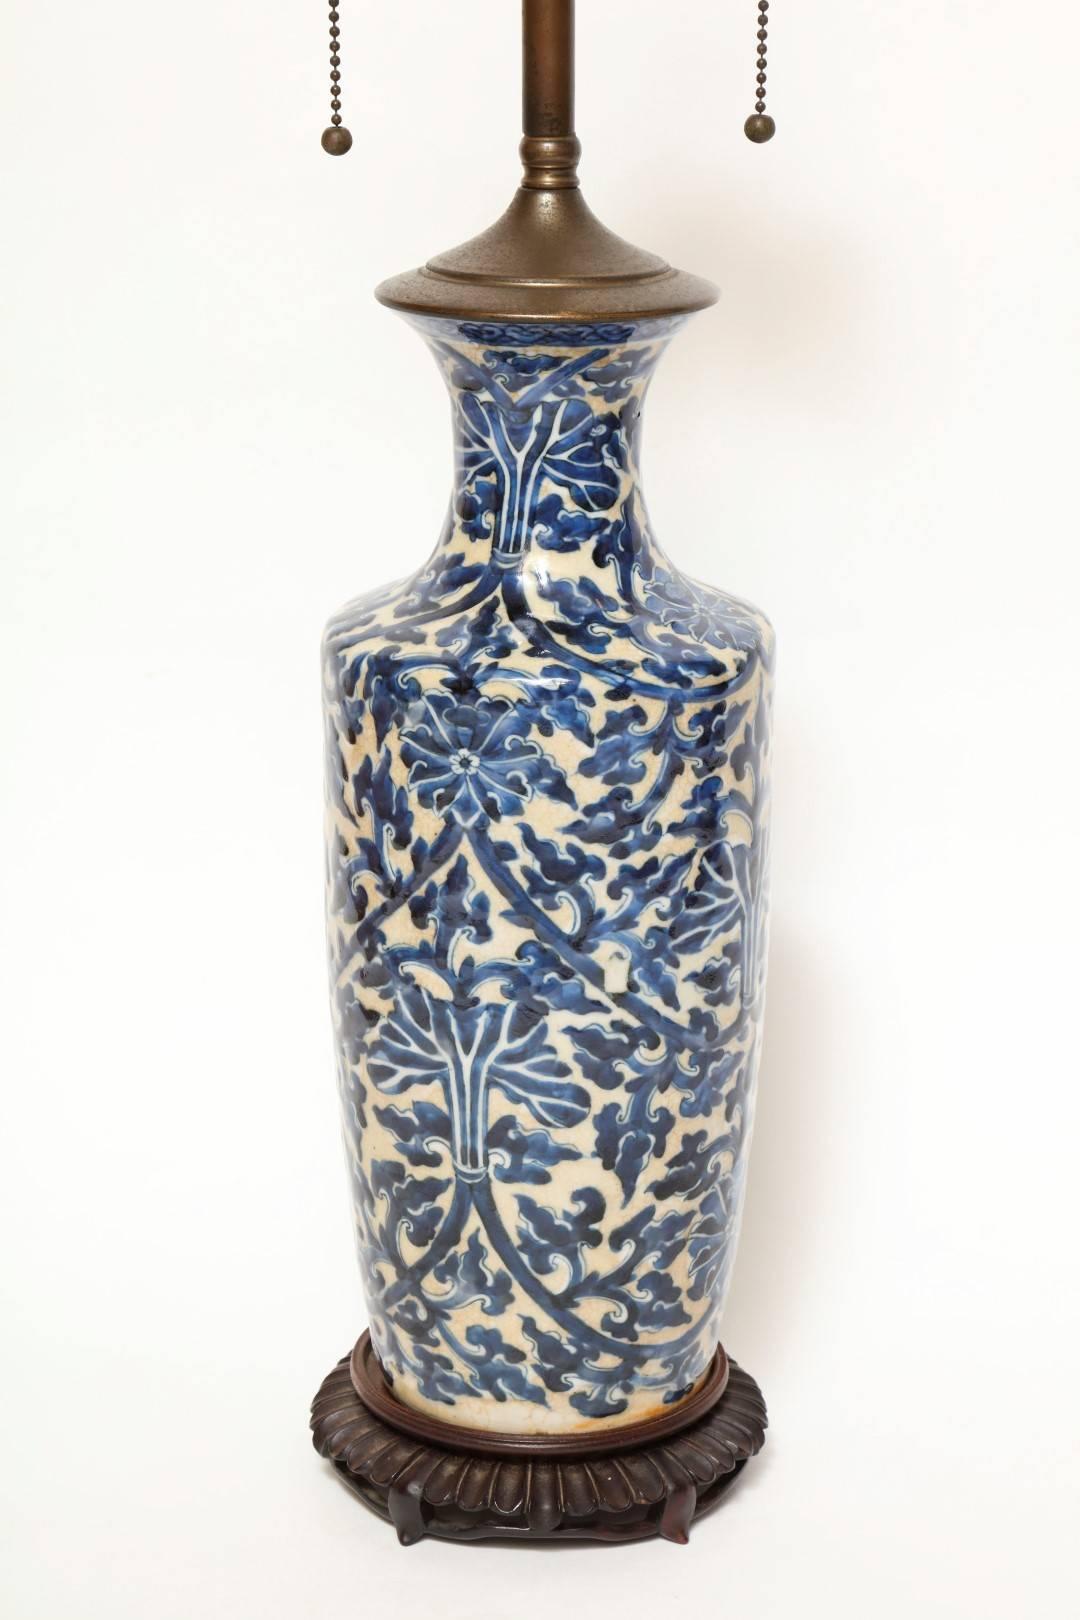 A blue and white Moorish style table lamp, in a blue and white trefoil motif, on circular gadrooned base with four feet, the double cluster fitting surmounted by a turned stem with finial.